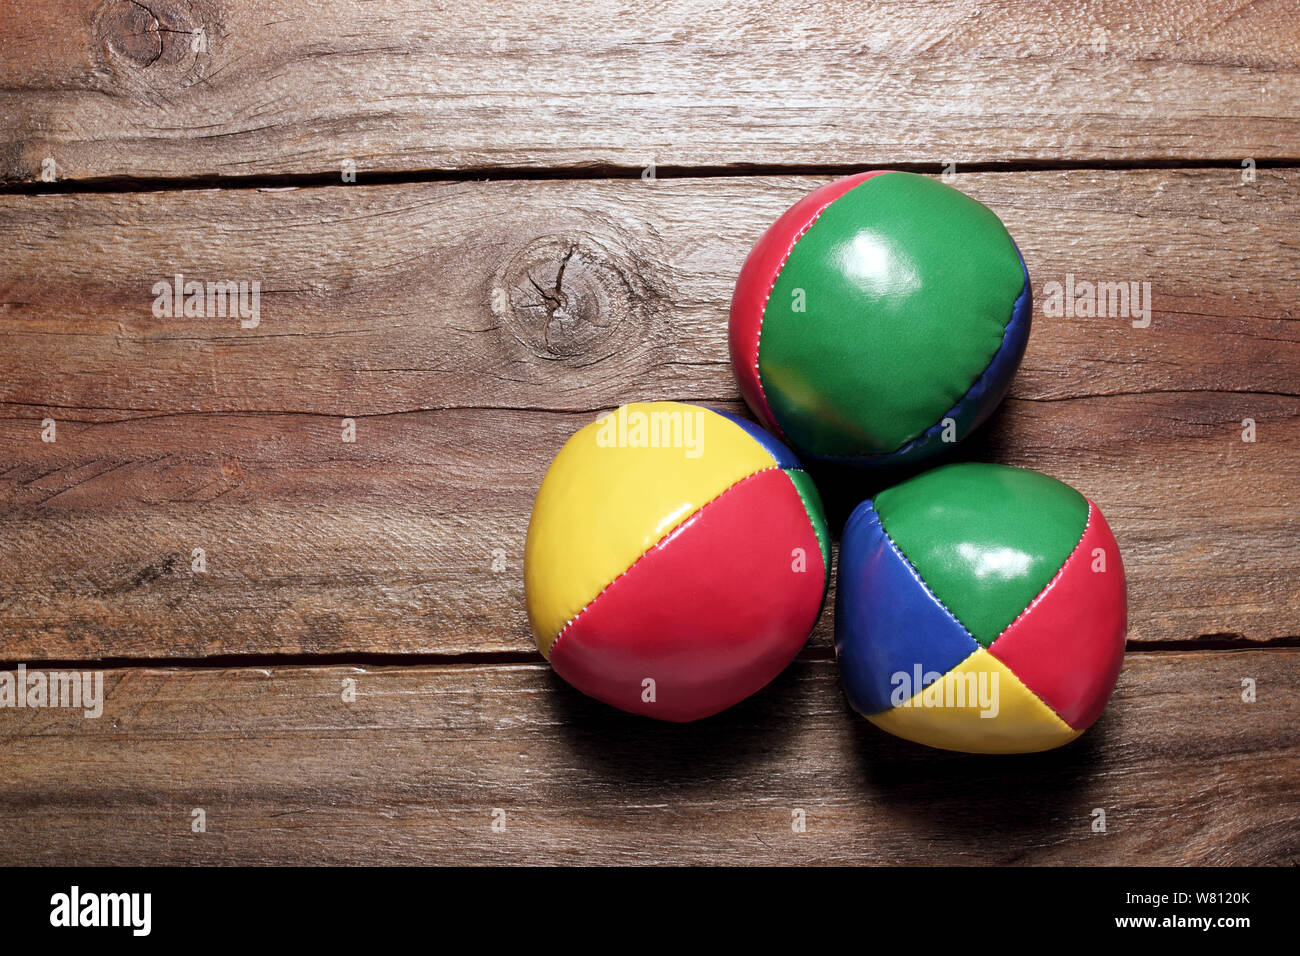 Juggling Balls on Wooden Background Stock Photo